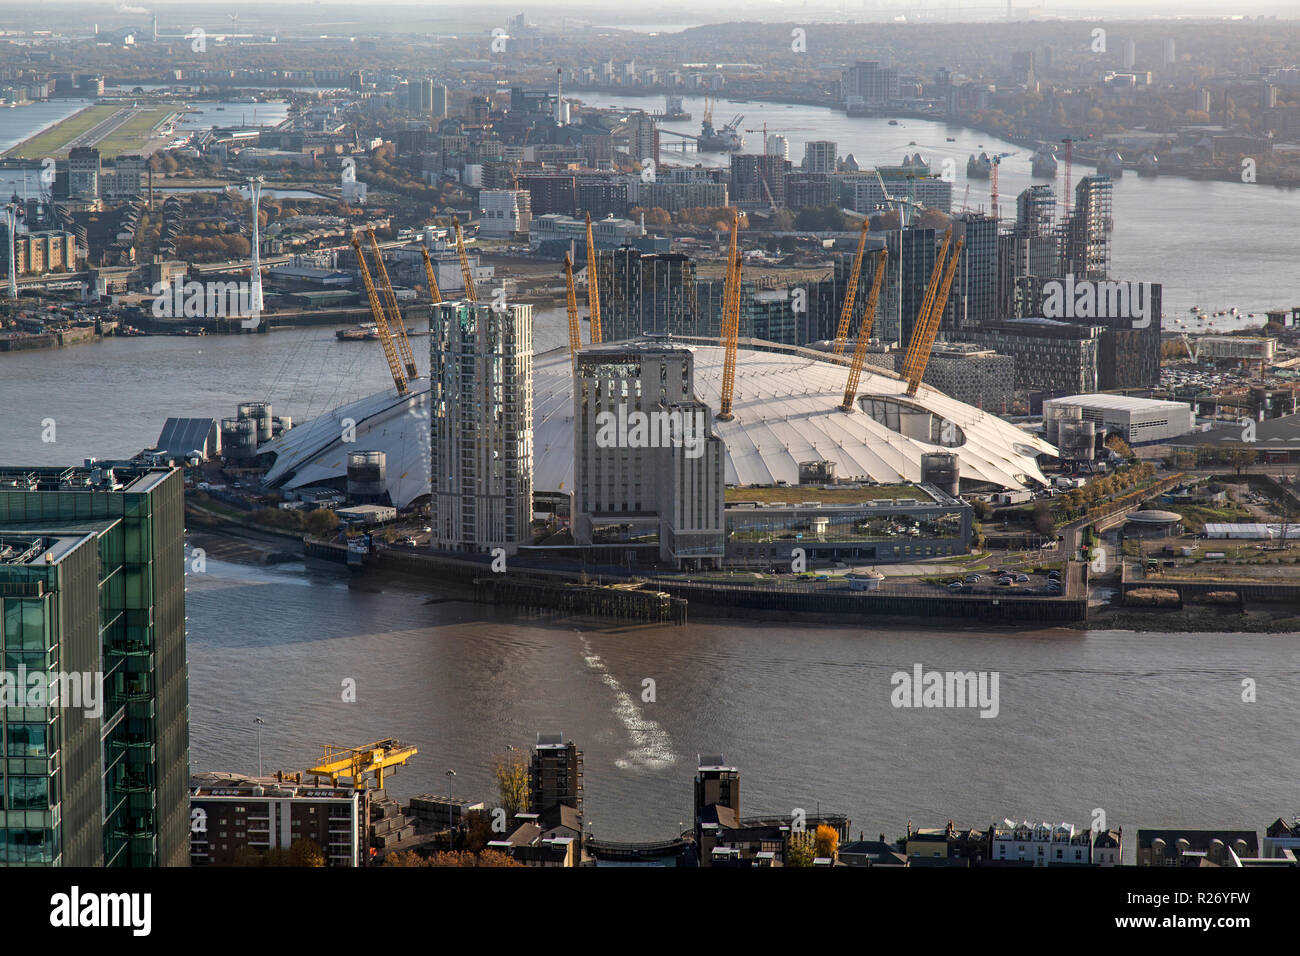 The O2 Arena, formerly the Millennium Dome, located next to the River Thames in south East London, England. Stock Photo